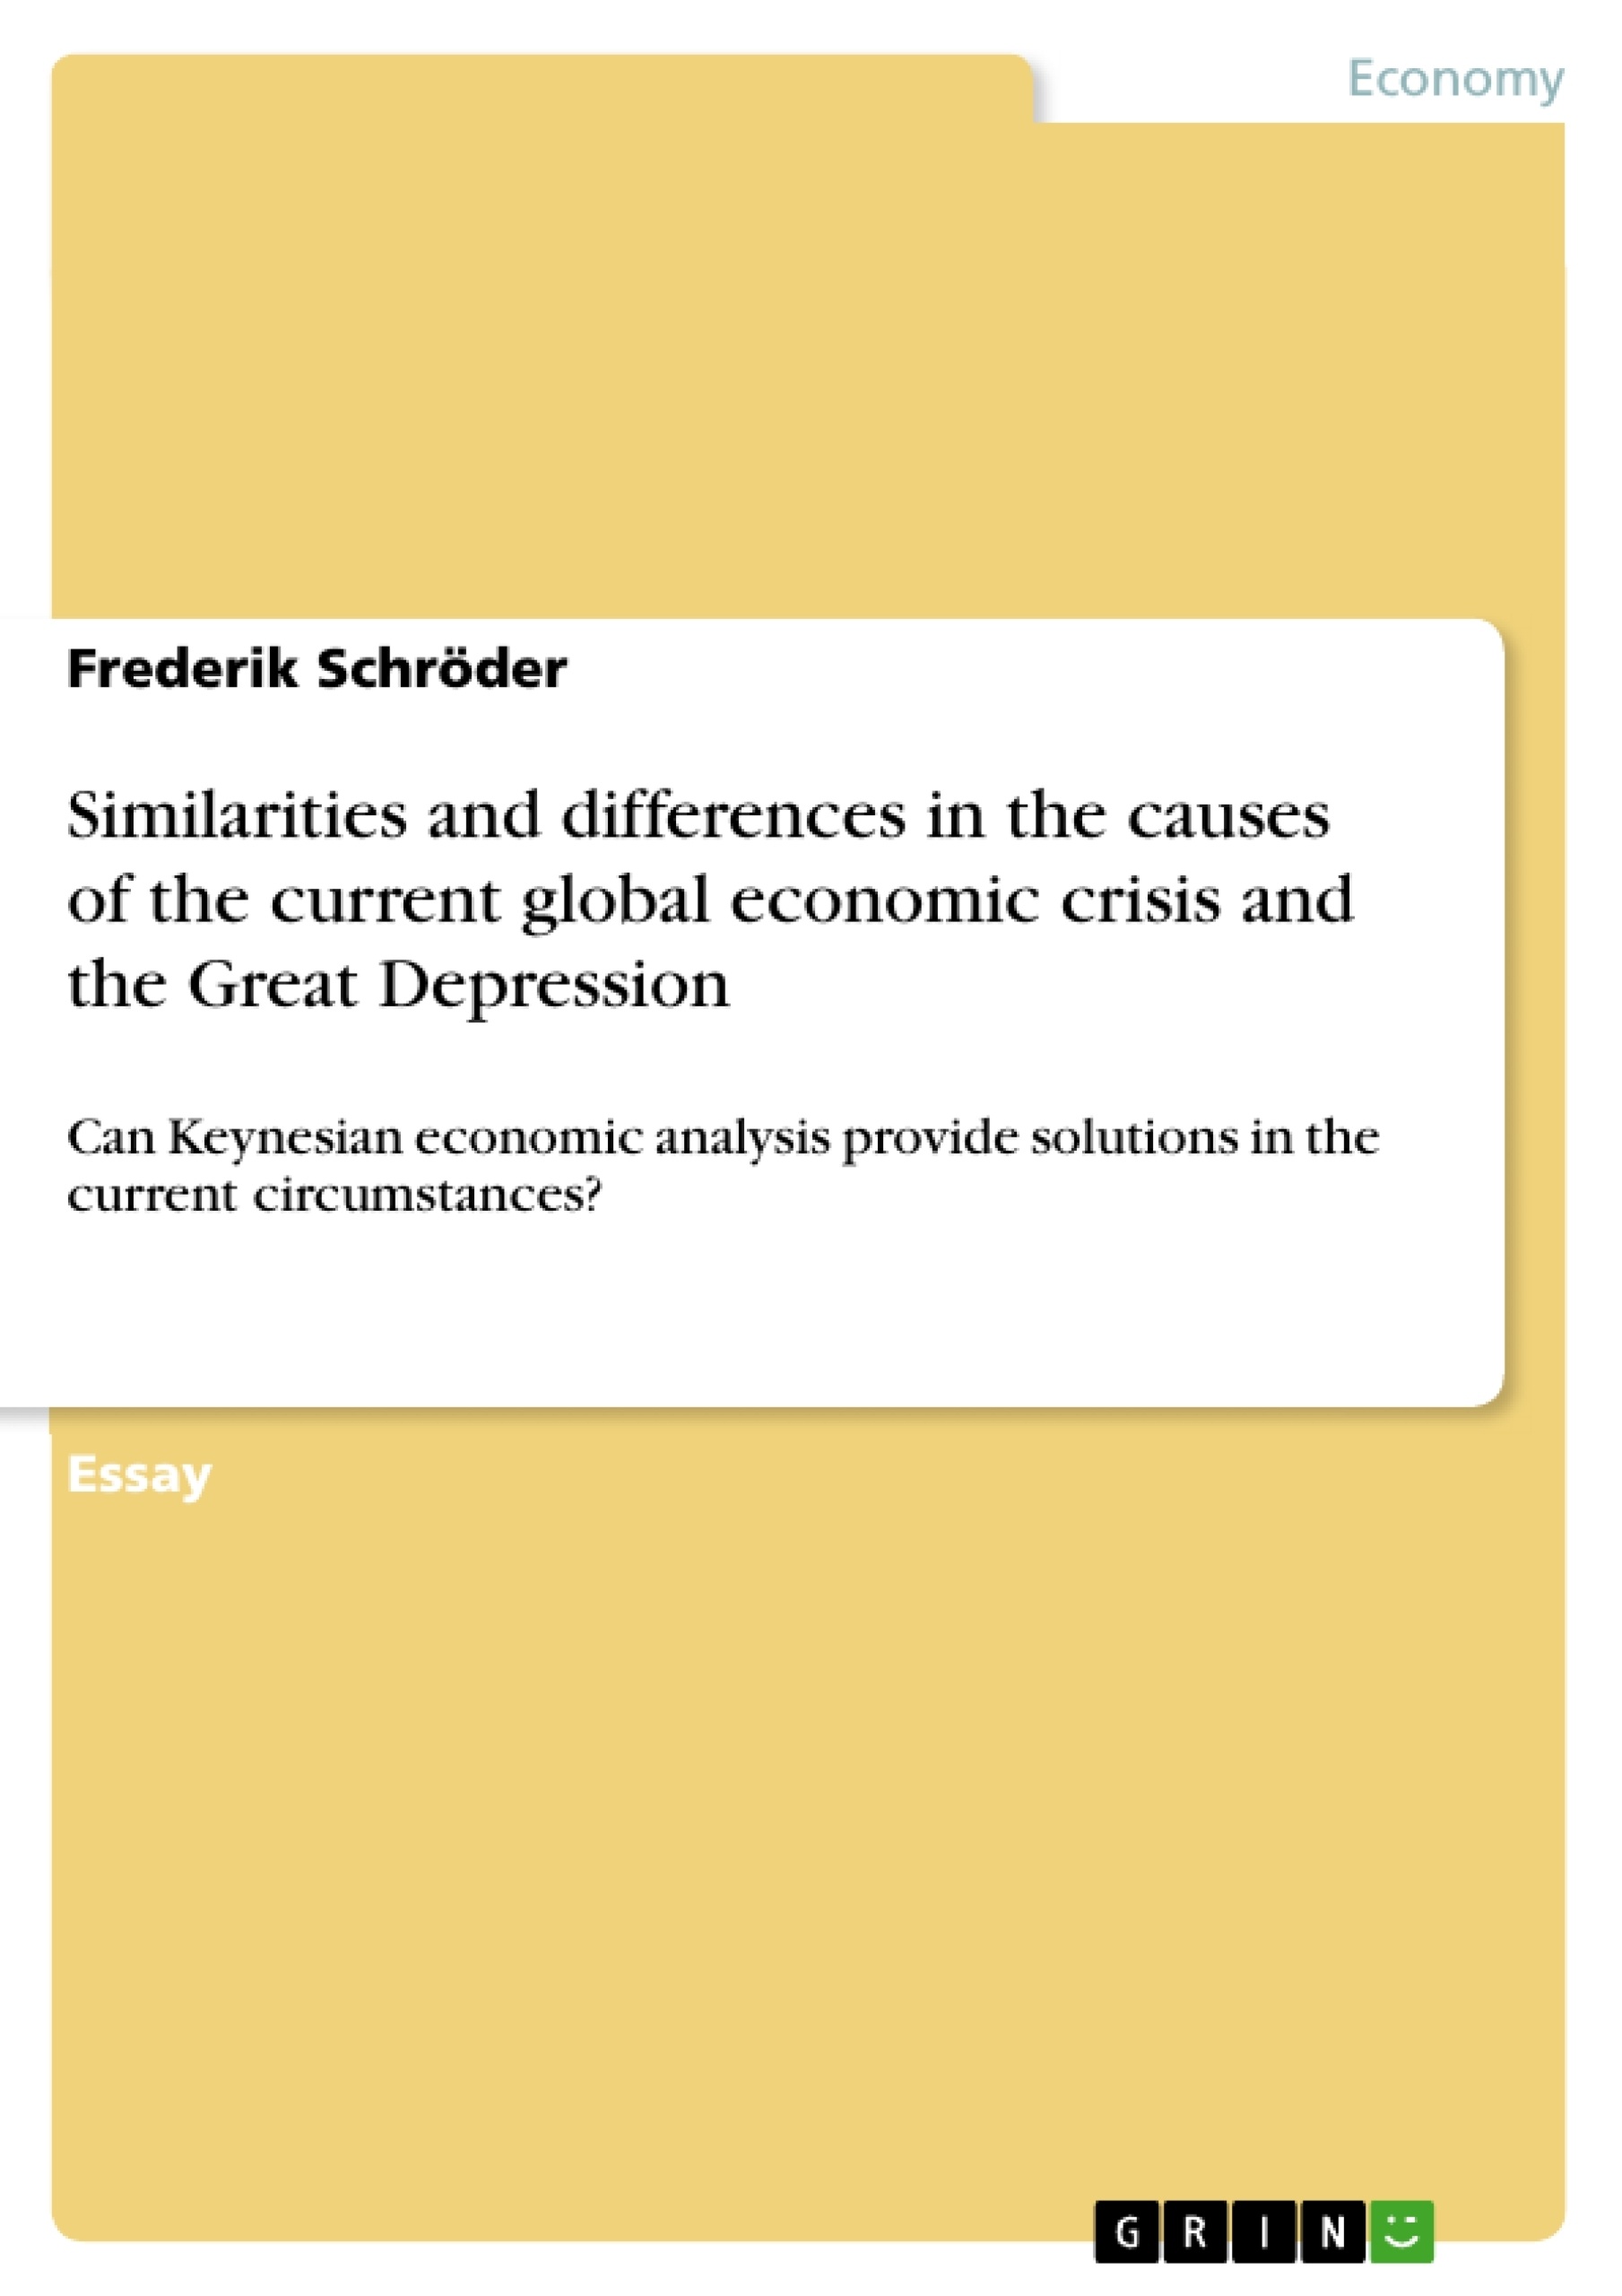 Titre: Similarities and differences in the causes of the current global economic crisis and the Great Depression